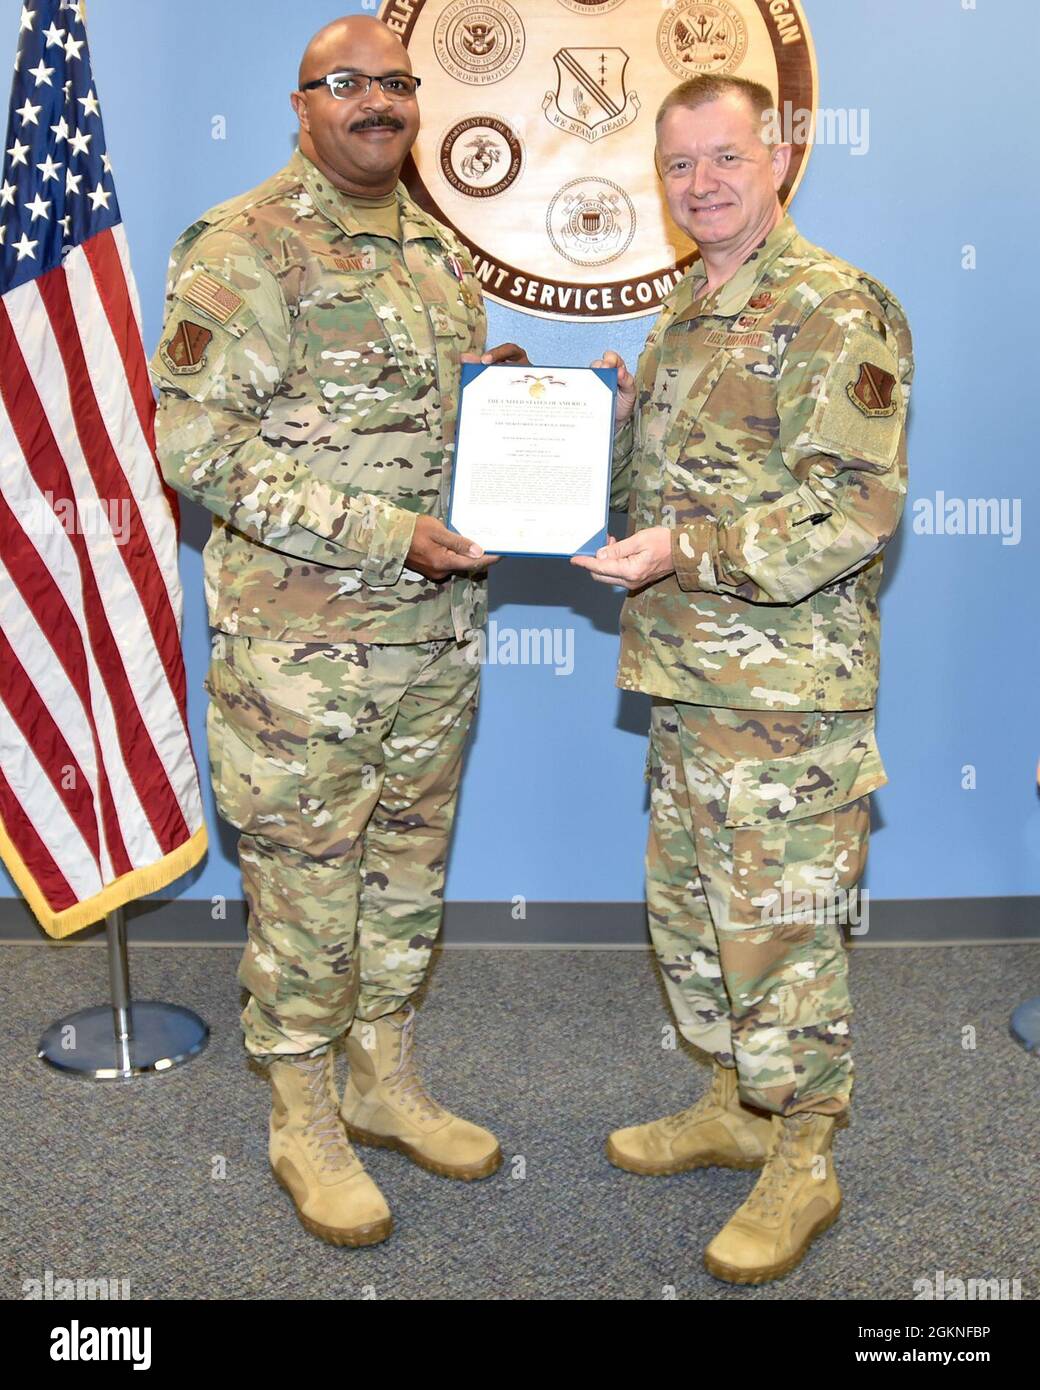 SELFRIDGE AIR NATIONAL GUARD BASE, Mich.— Sr. Master Sgt. Maurice Graves, 127th Wing human resource advisor here,  is awarded the Meritorious Service Medal by Brig. Gen. Rolf E. Mammen, 127th Wing commander here, on June 5, 2021. Stock Photo